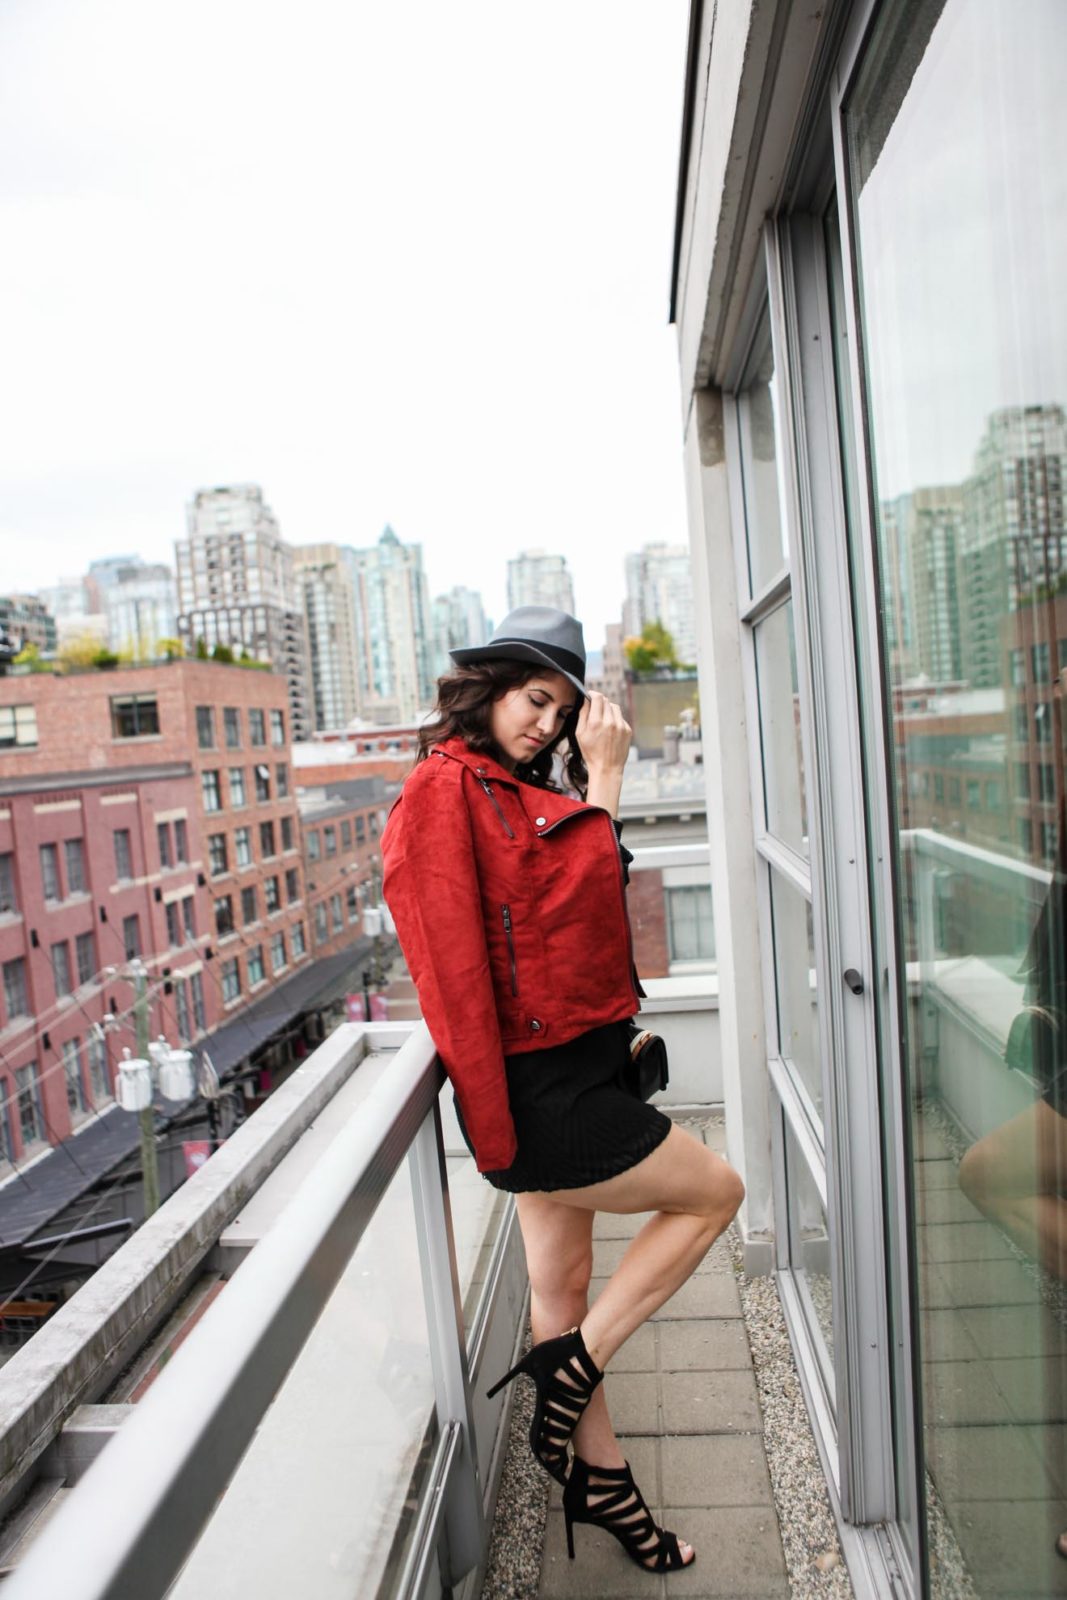 Welcome Fall | Laura Lily - Fashion, Travel and Lifestyle Blog - Opus Hotel, Vancouver